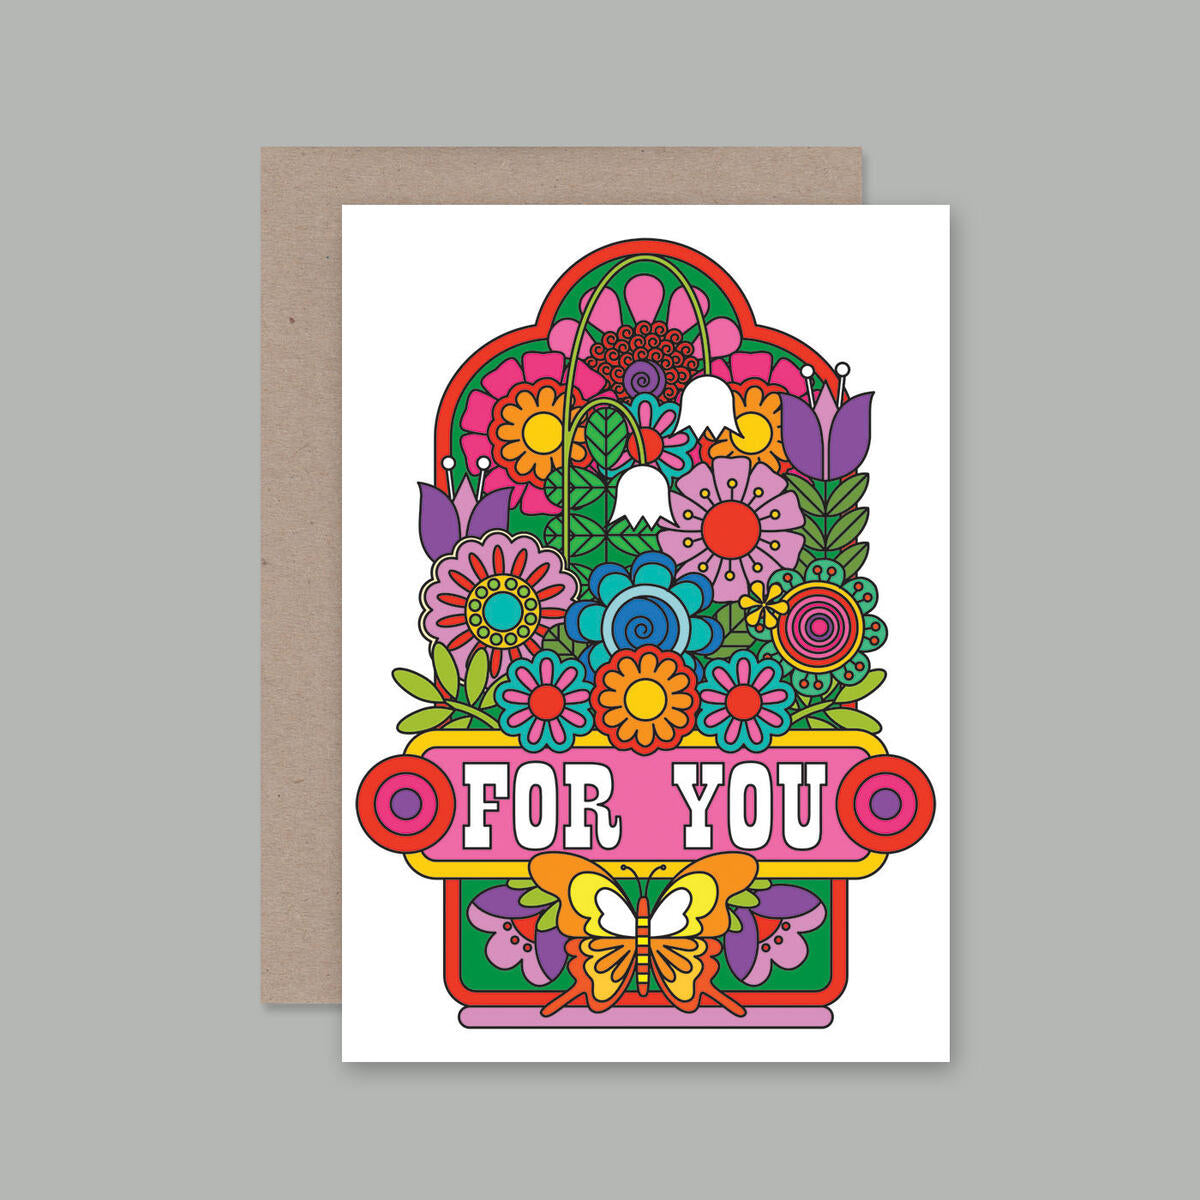 AHD - "Retro For You" Greeting Card